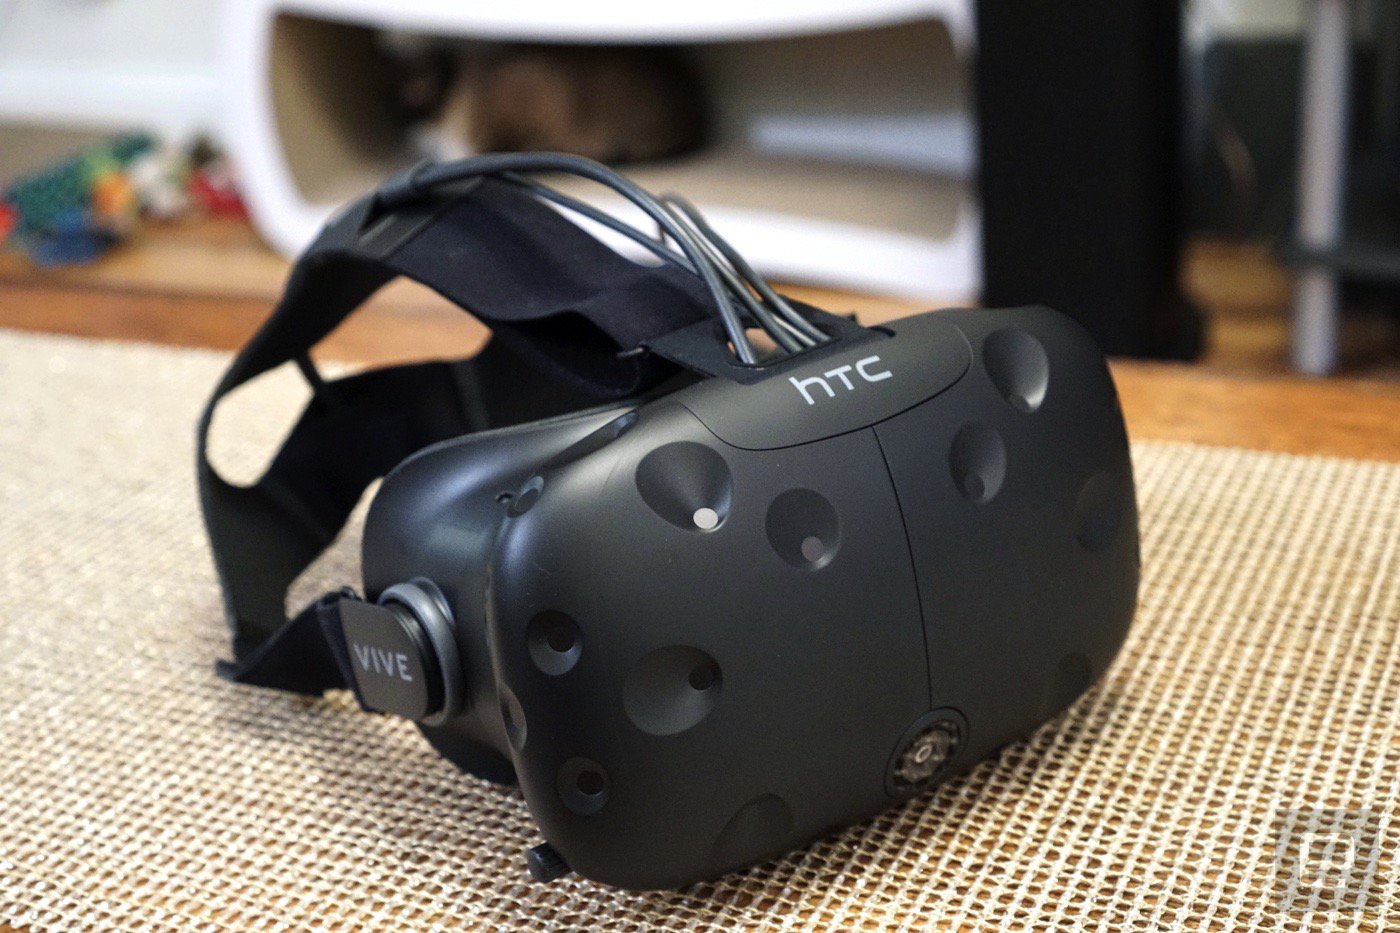 Mini review video: Our verdict on the HTC Vive in a minute